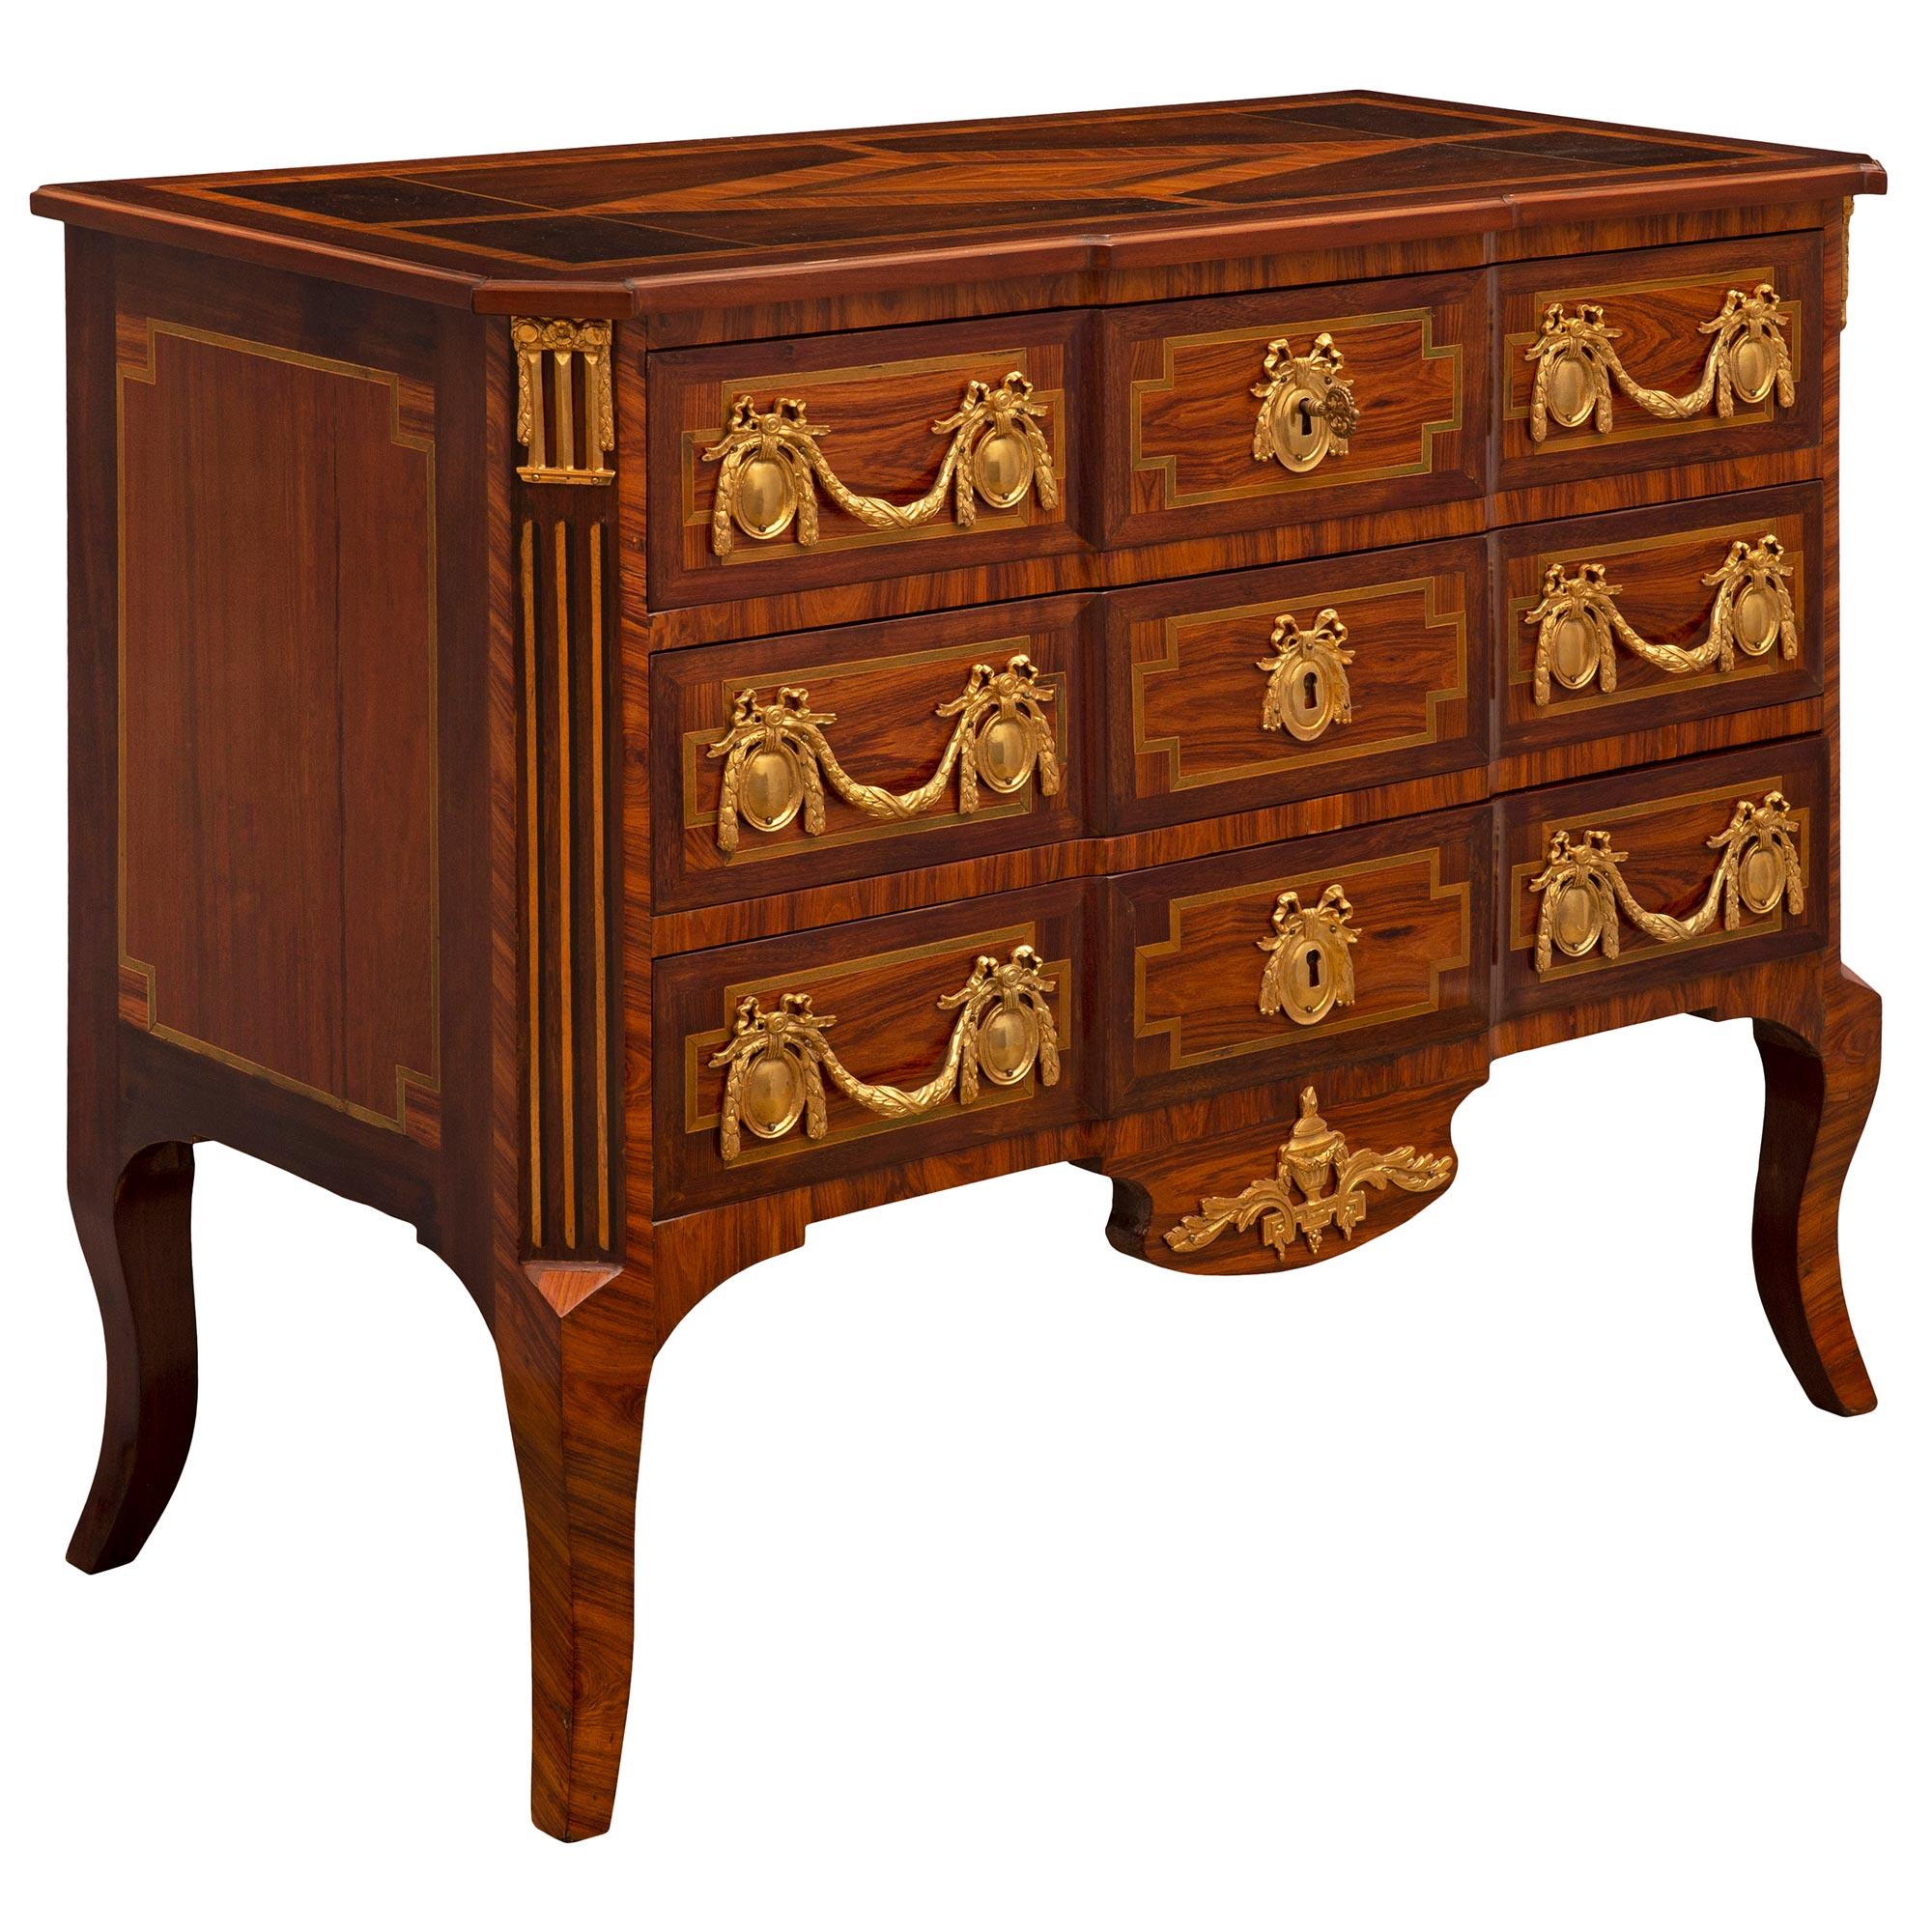 French 19th Century Transitional St. Kingwood, Tulipwood, and Ormolu Commode In Good Condition For Sale In West Palm Beach, FL